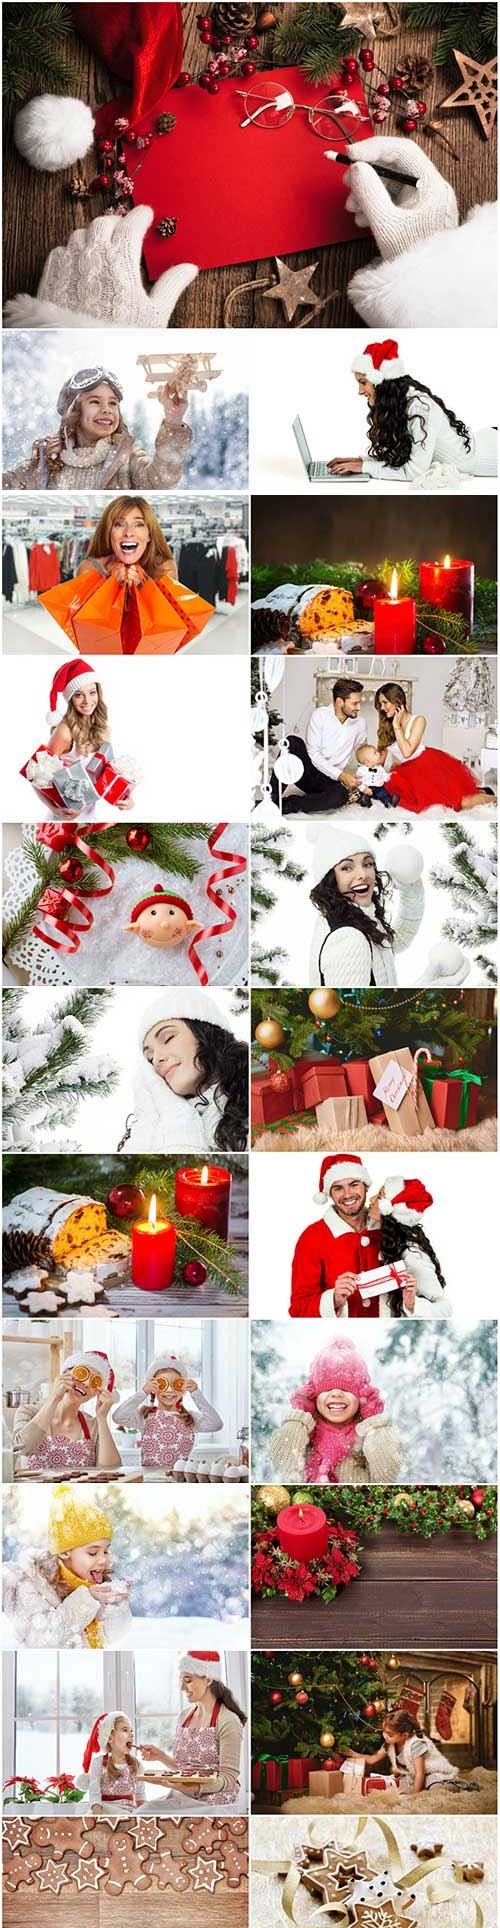 New Year and Christmas stock photos 93